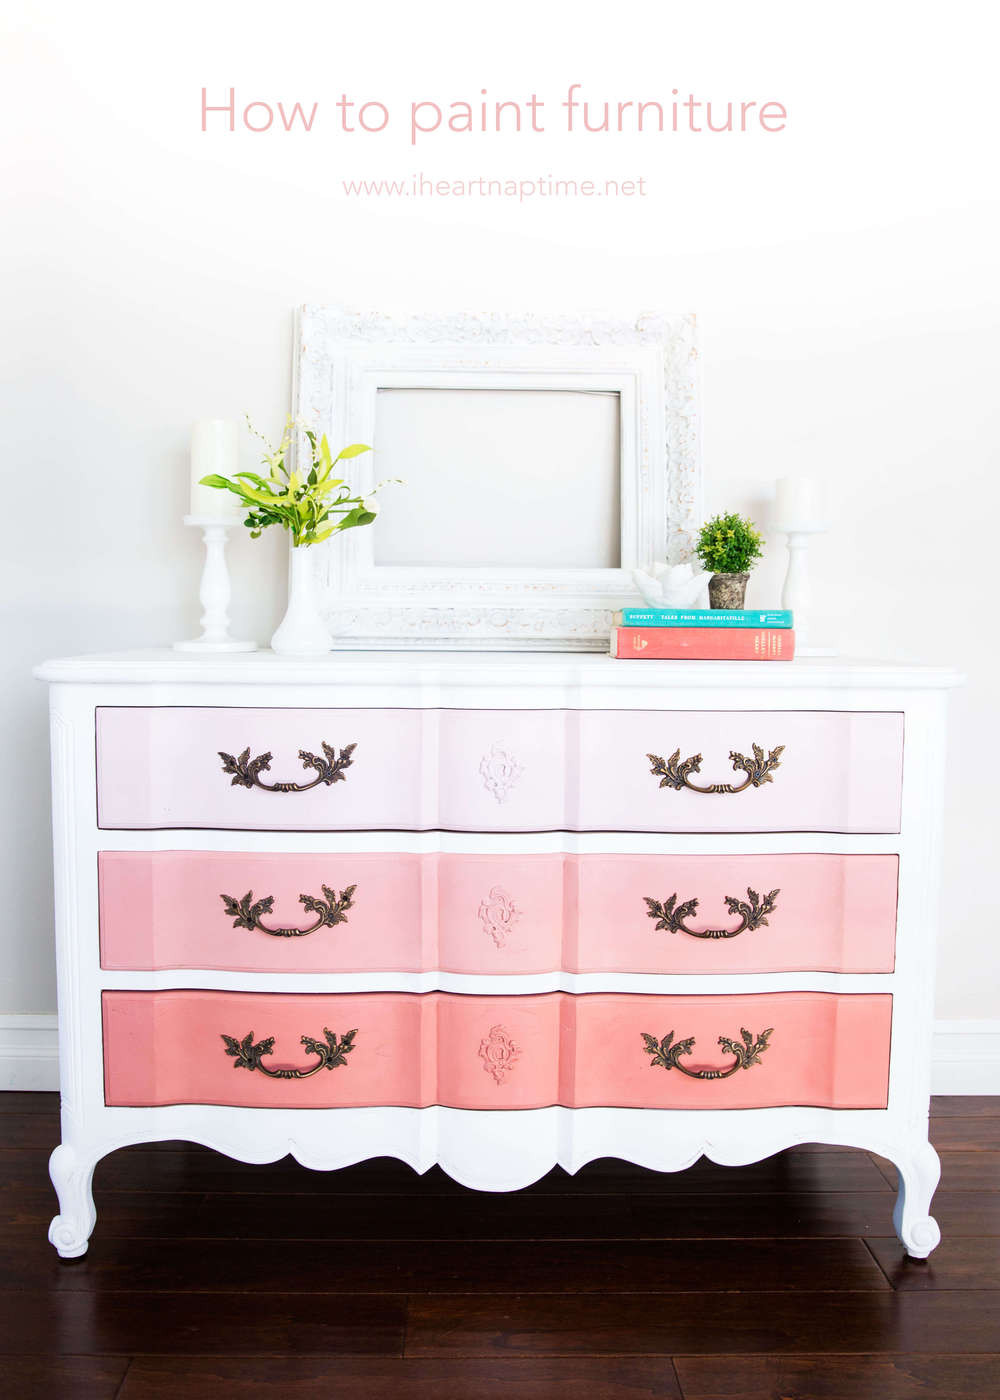 DIY Painting Wood Furniture
 How to Paint Furniture and Ombre Dresser I Heart Nap Time